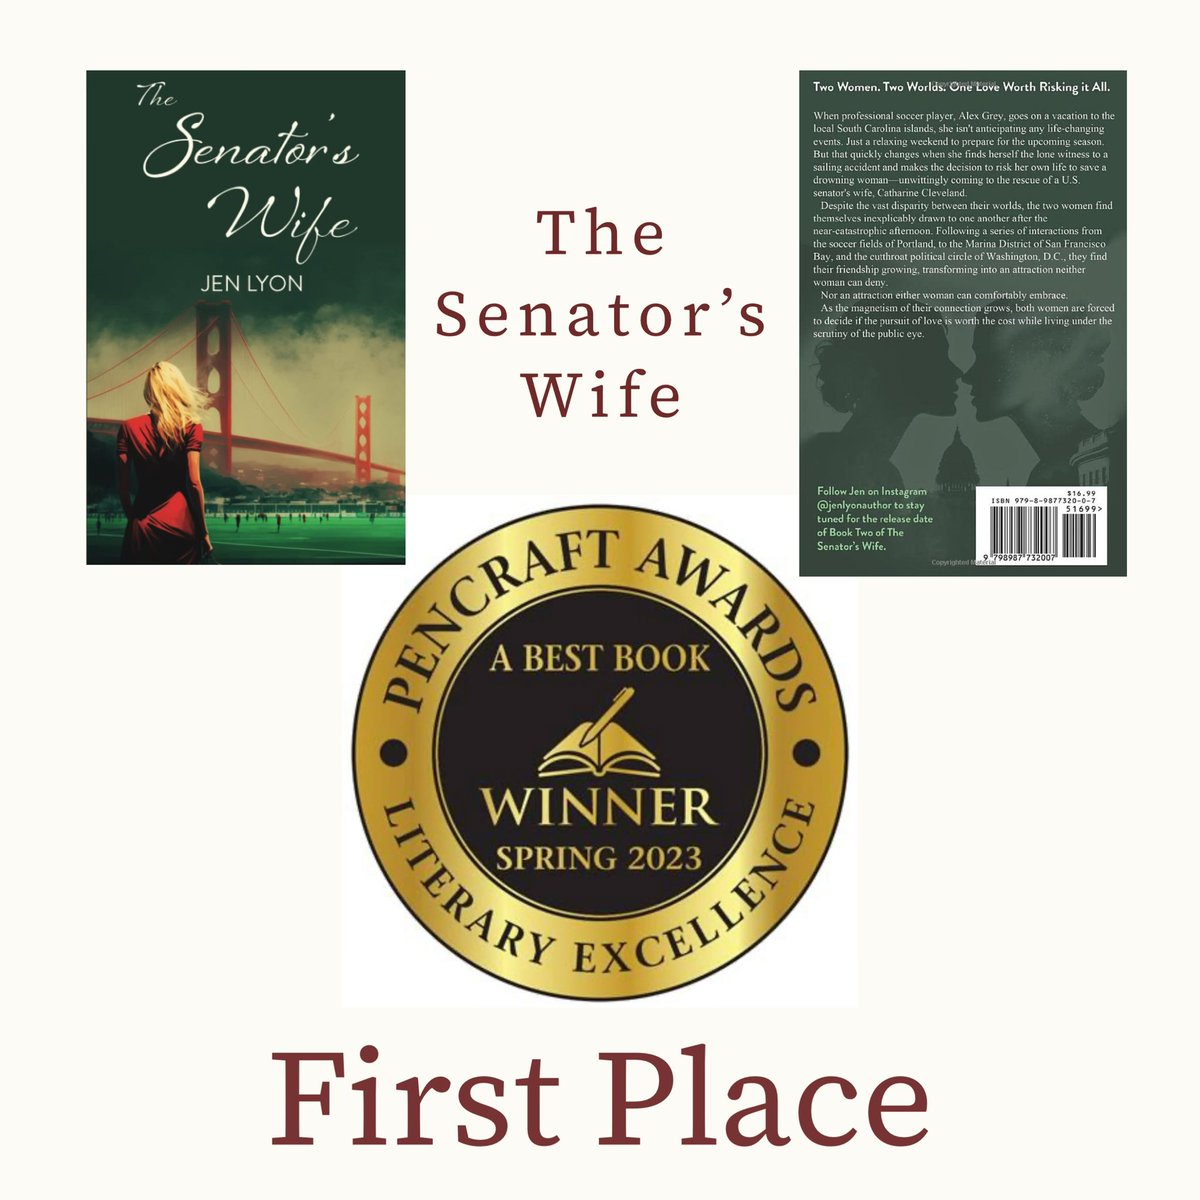 Grateful for another first place win for The Senator’s Wife! 🫶🏼✍🏼

#sapphicfiction #lgbtqfiction #lgbtqbooks #lesfic #lesfiction #wlwromance #wlwfiction #wlwbooks #sapphicromance #sapphicbooks #wlwbooks #sapphicromance #wlwromance #ffromance #lesbianfiction #lesbianromance #lgbtq